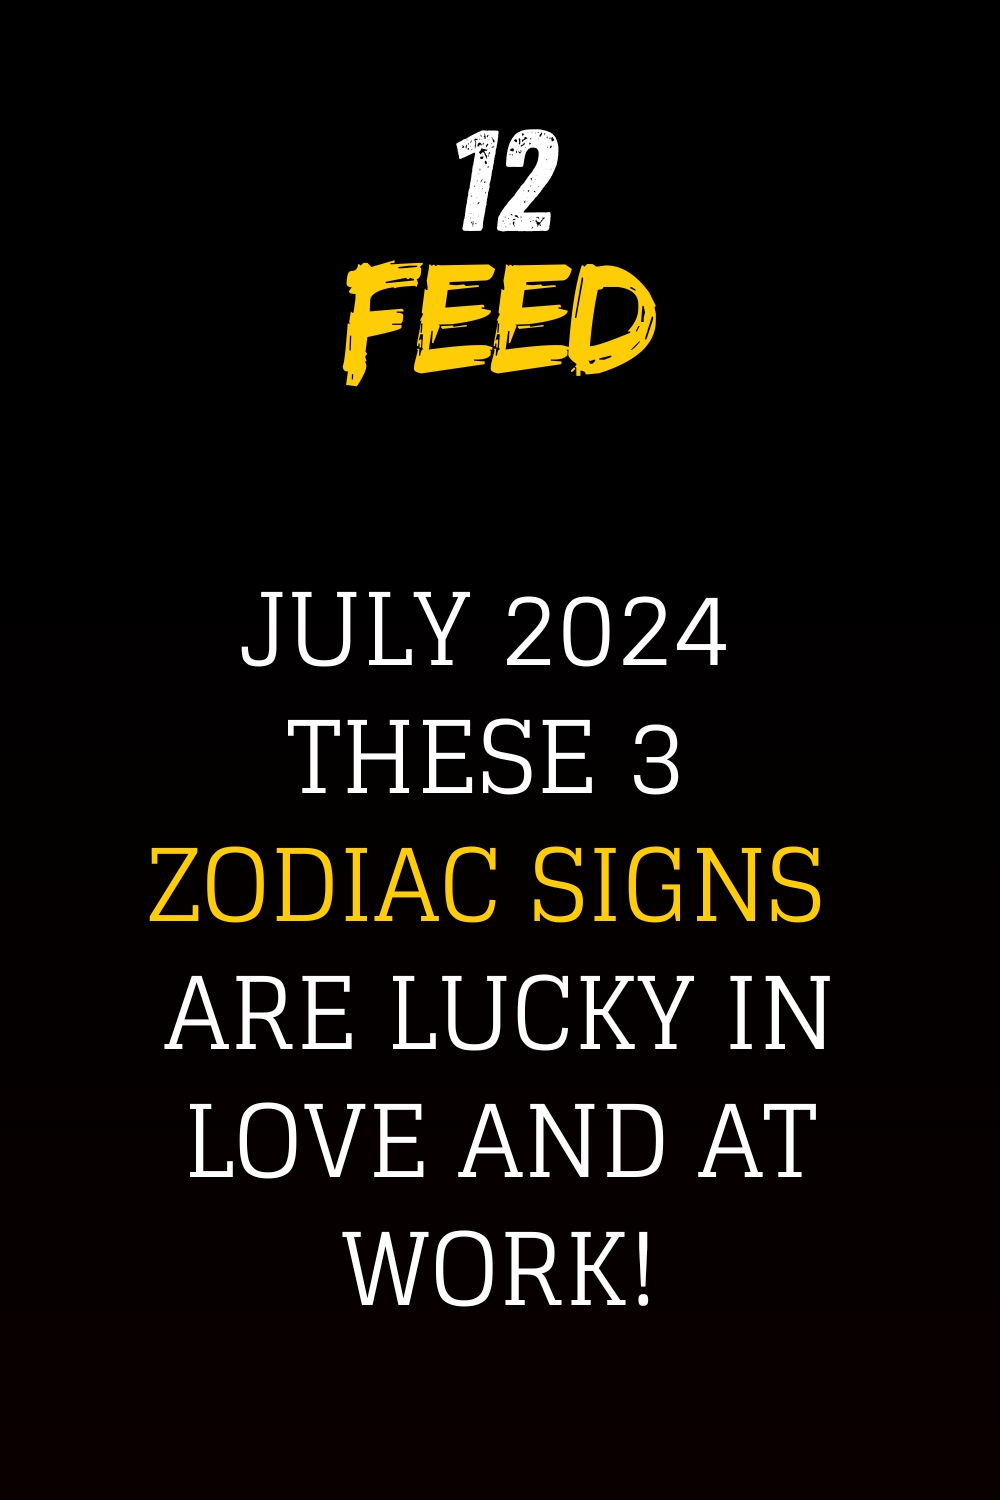 July 2024 These 3 Zodiac Signs Are Lucky In Love And At Work!